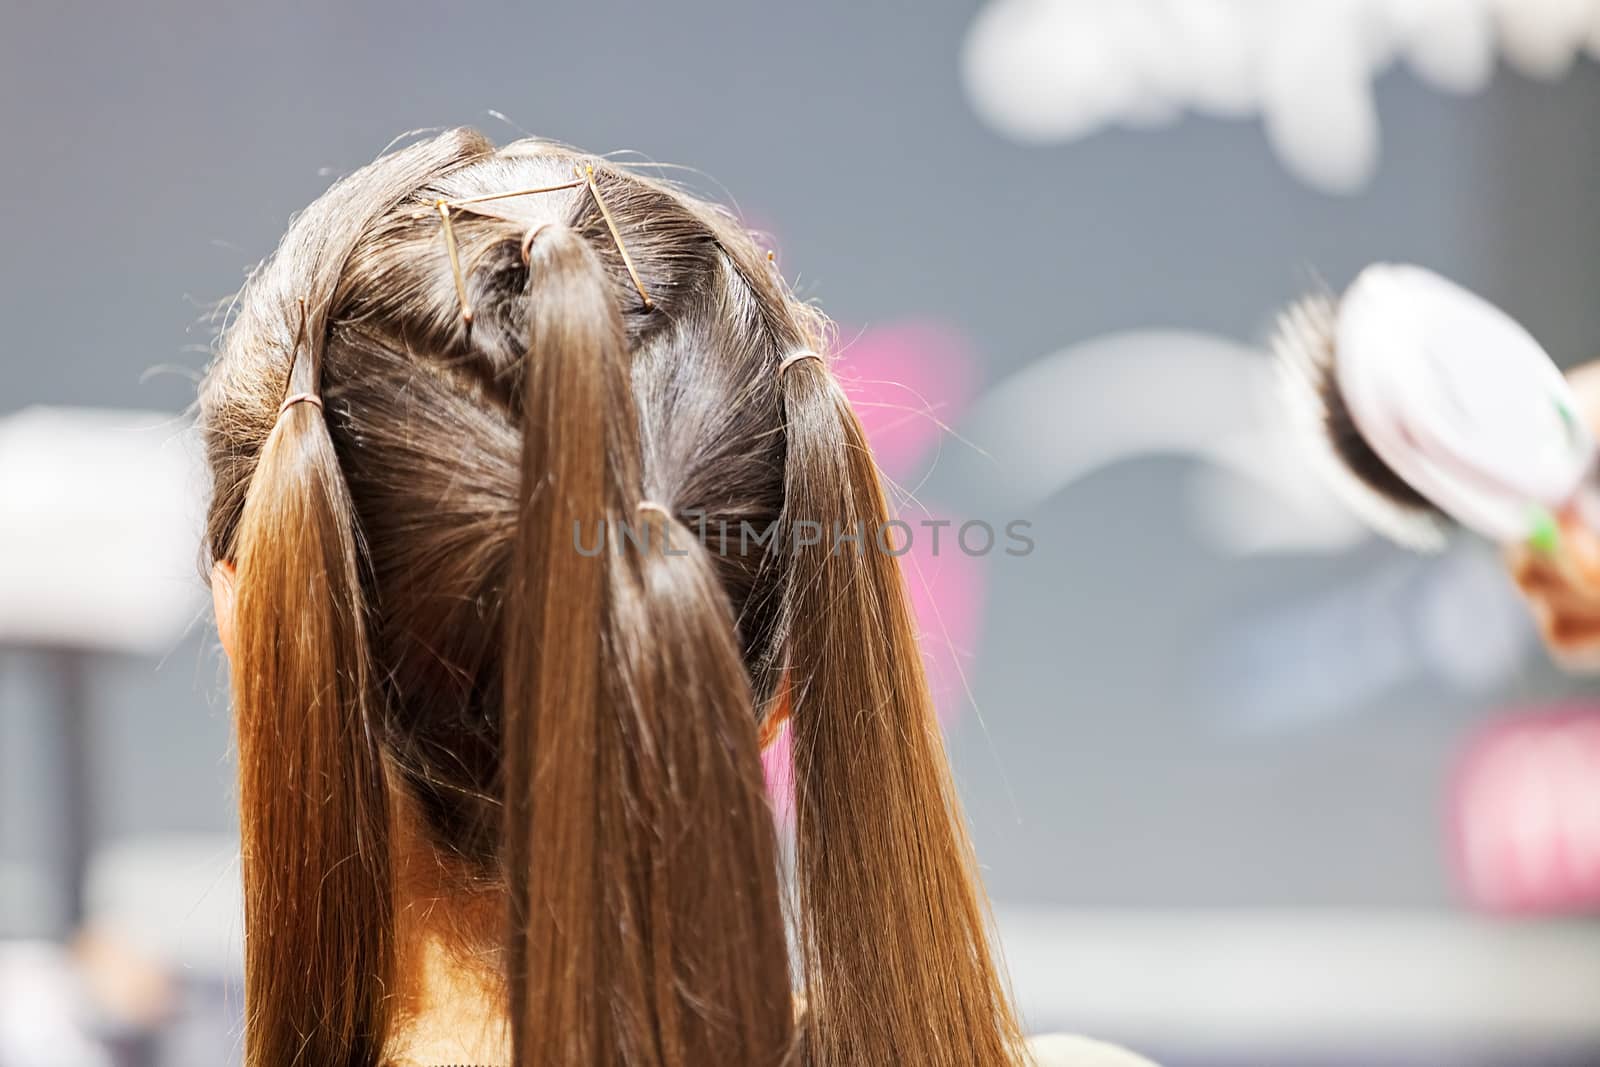 making coiffure with help of hair straightener, note shallow depth of field